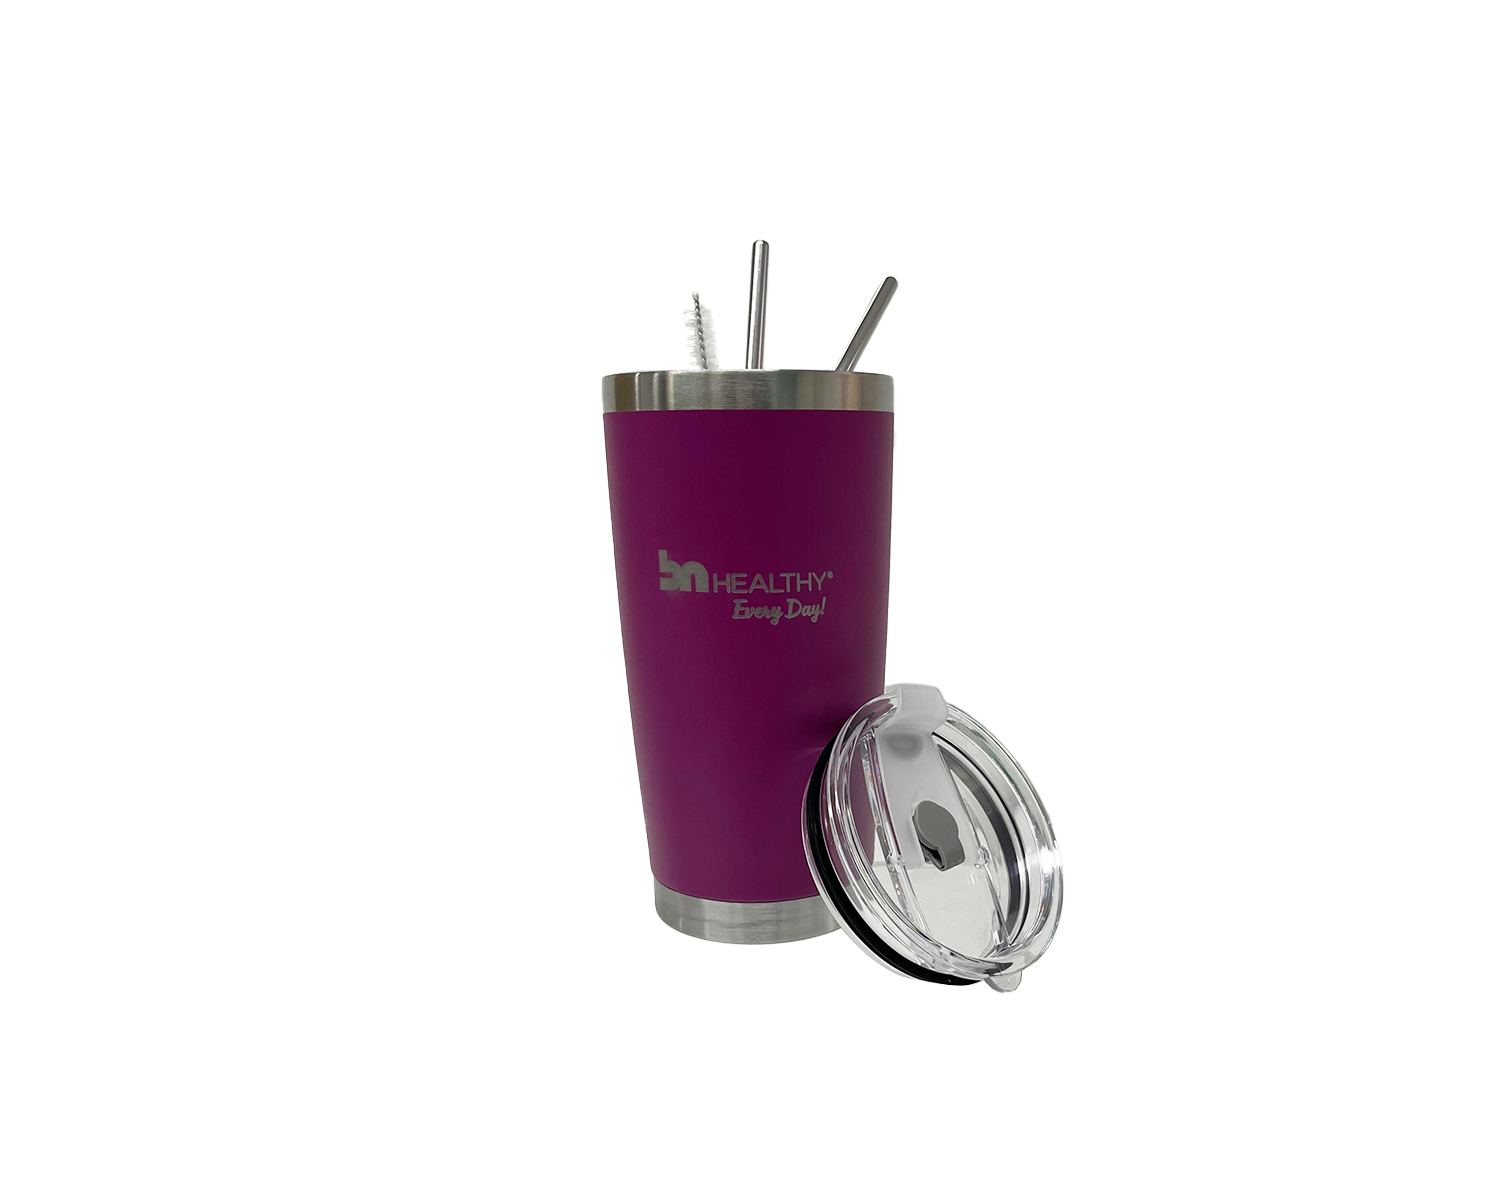 BN Travel Mug with Straws pink colour with multiple straws